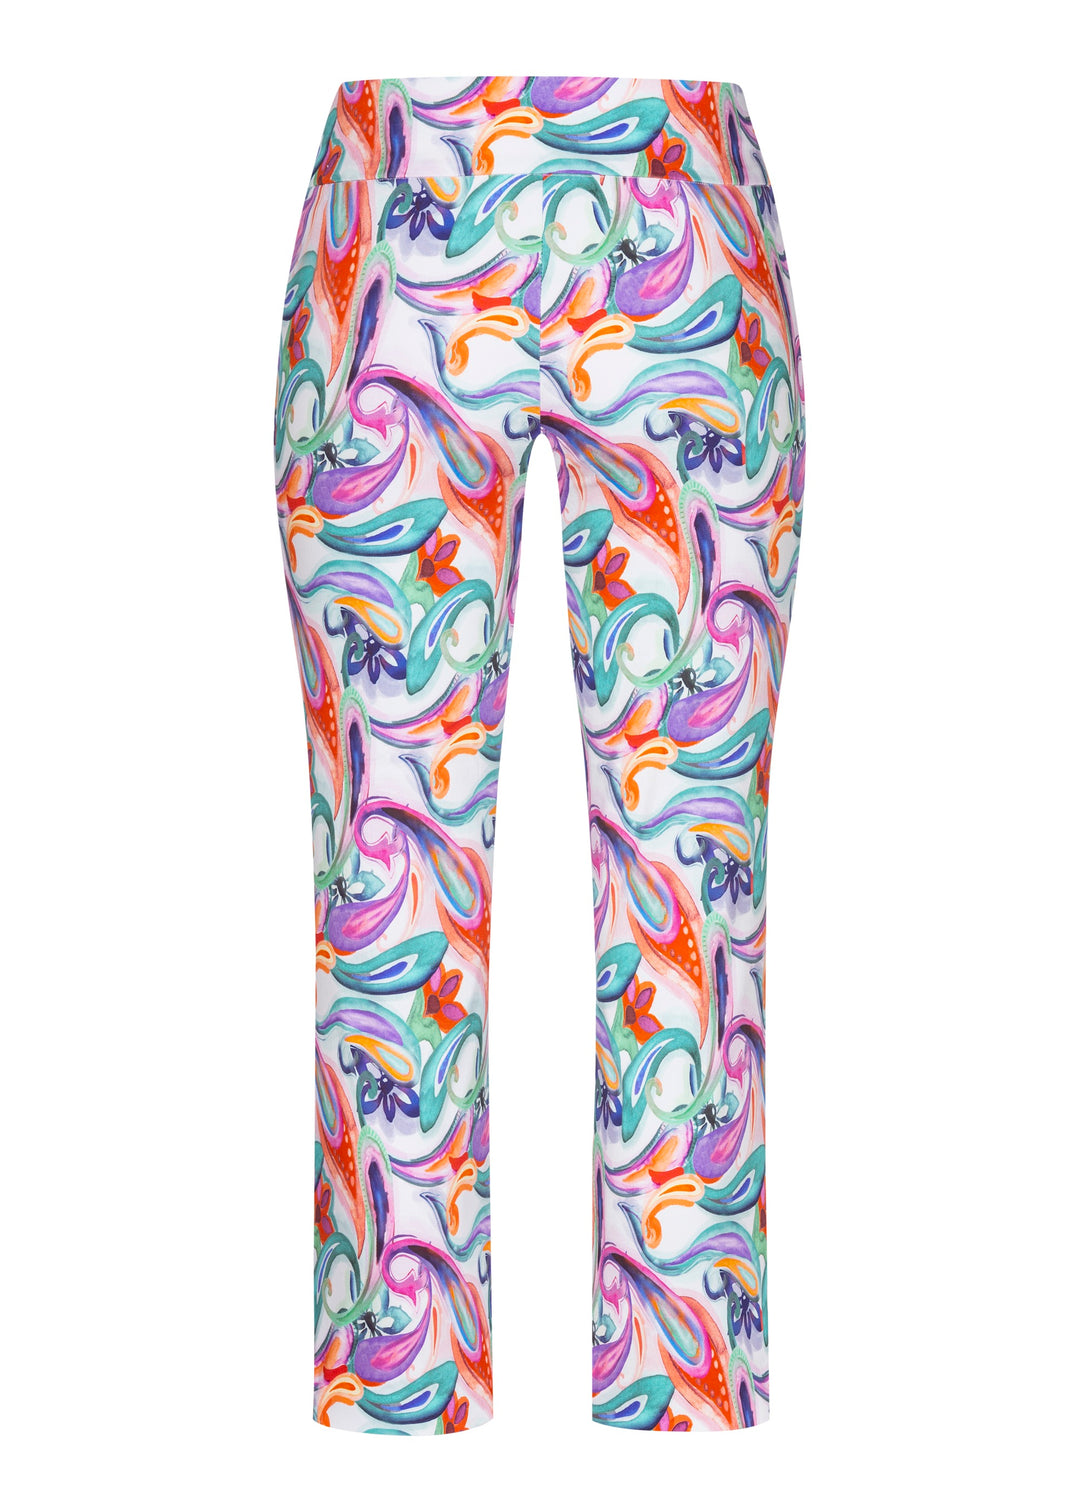 Stehmann Floral Printed Trouser - INA16 - 650